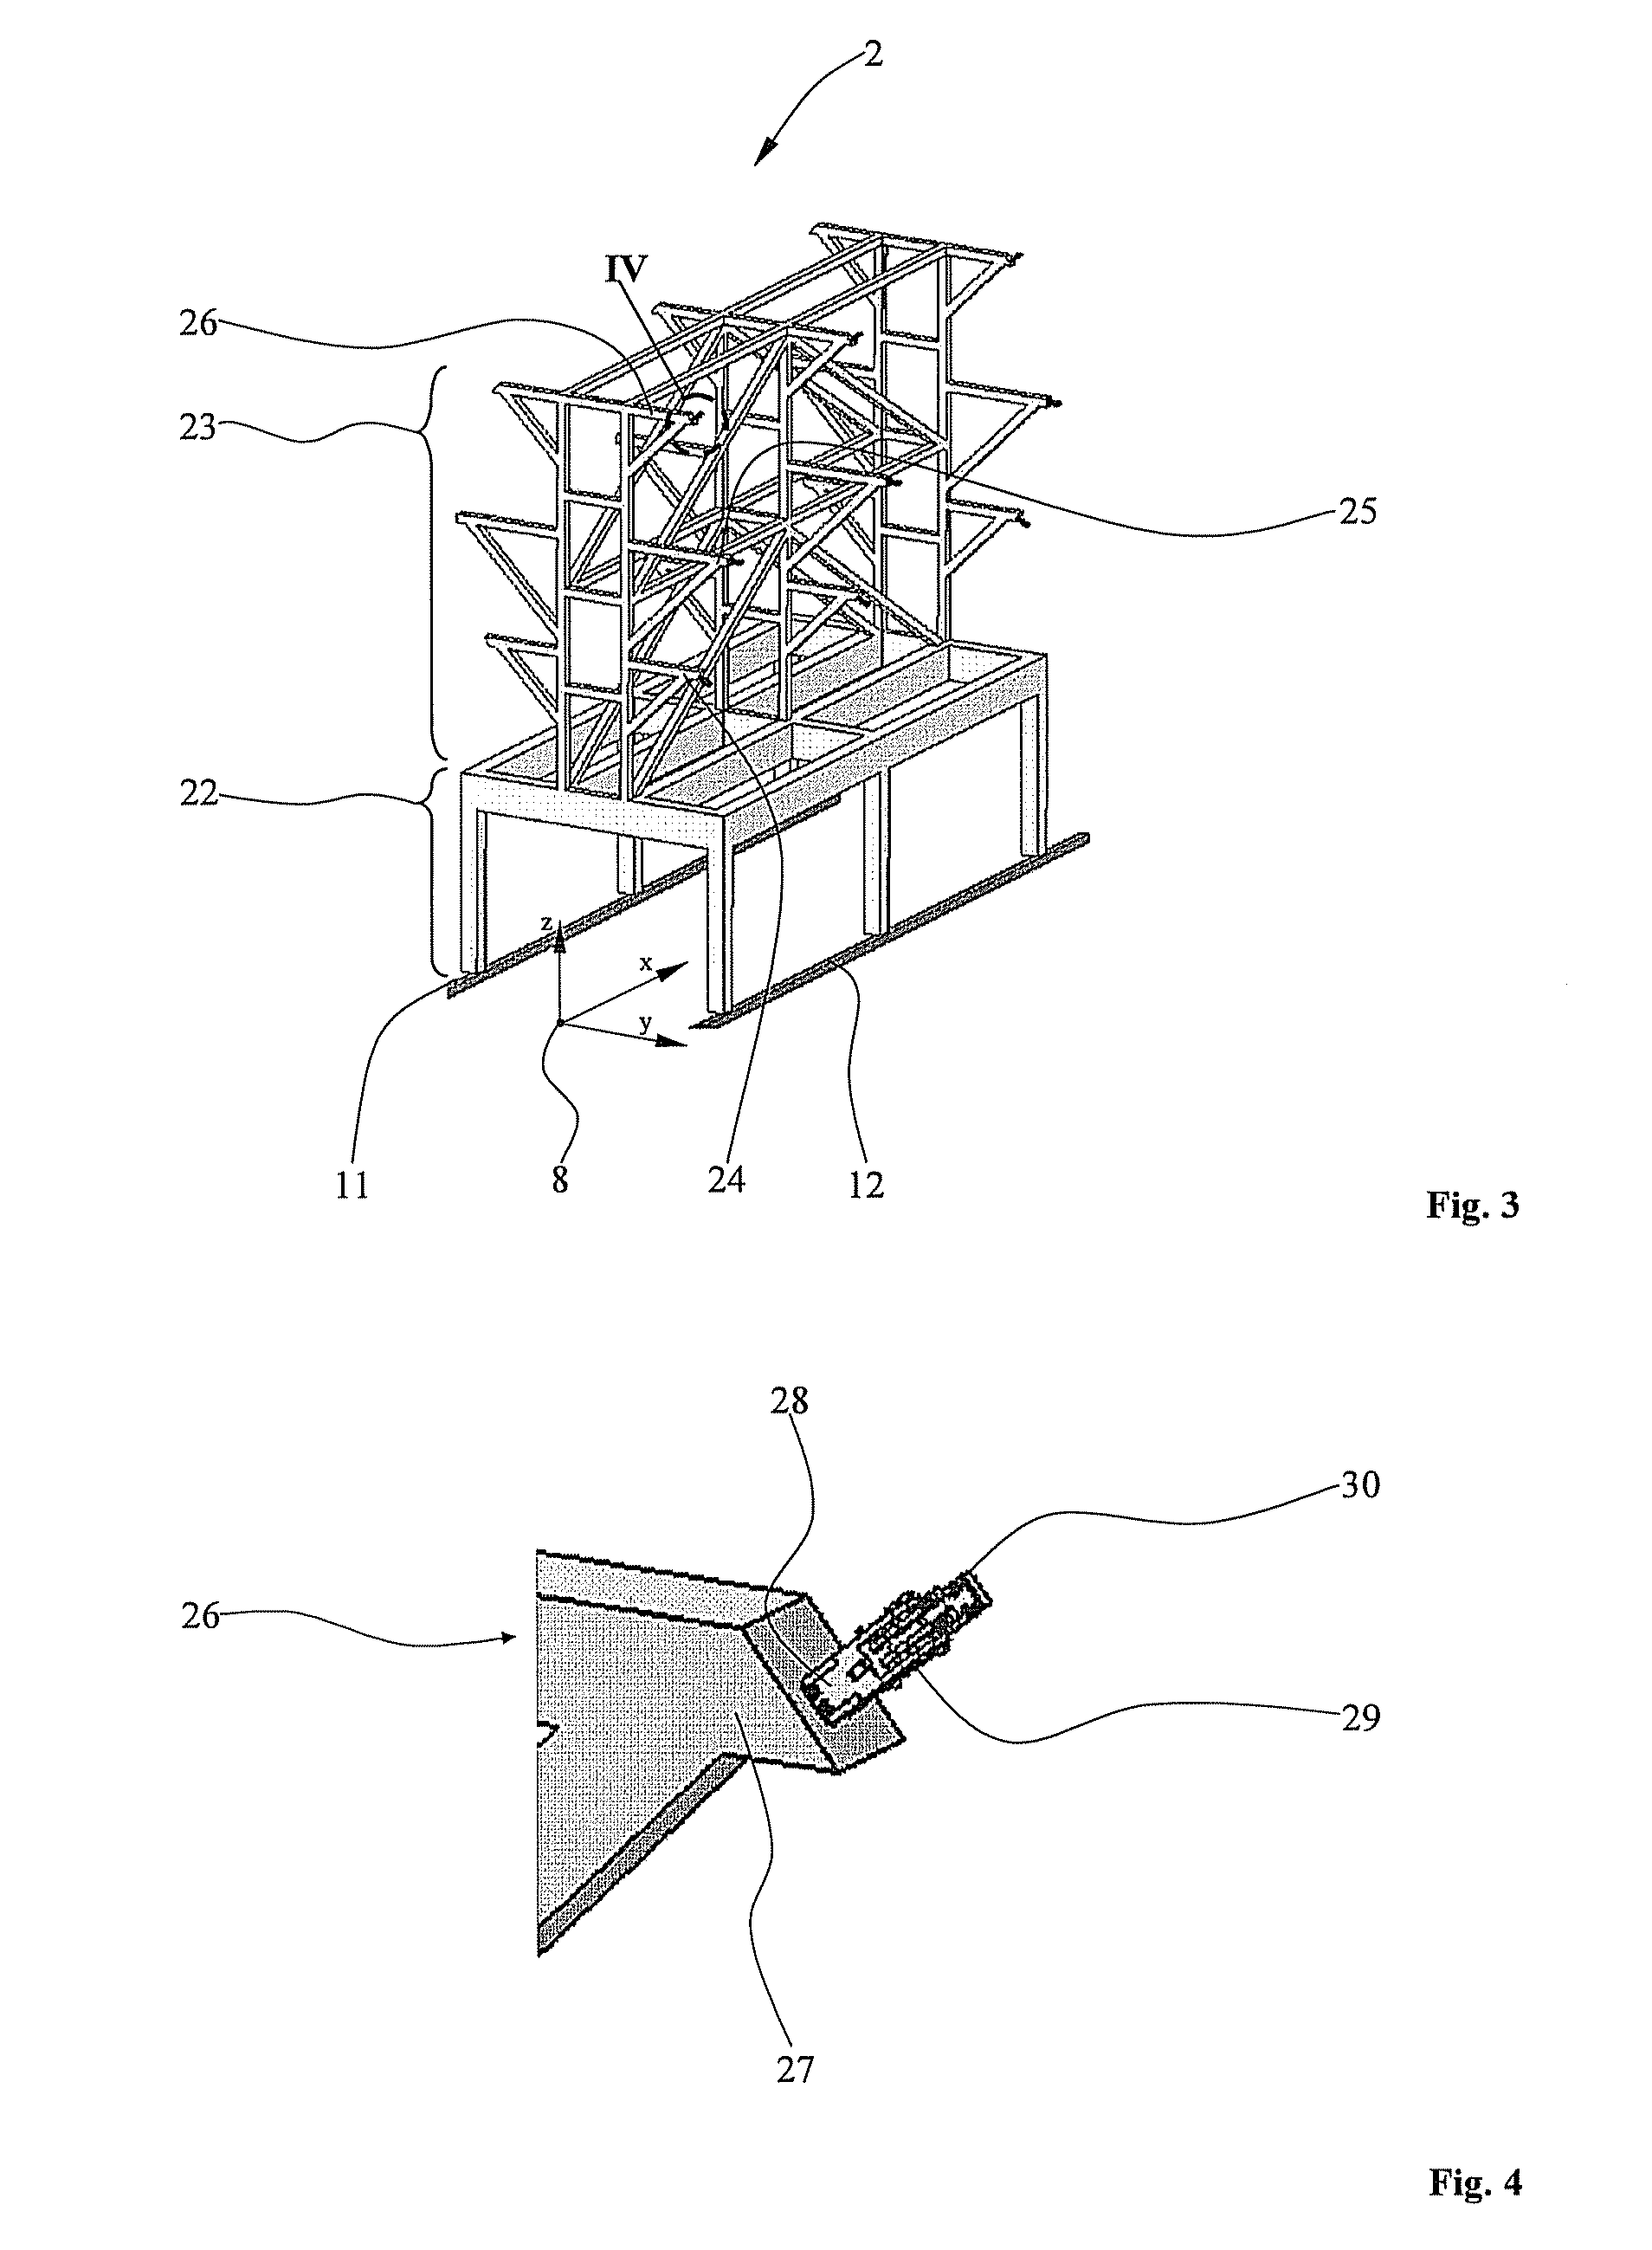 Device and method for supplying structural components to an assembly zone